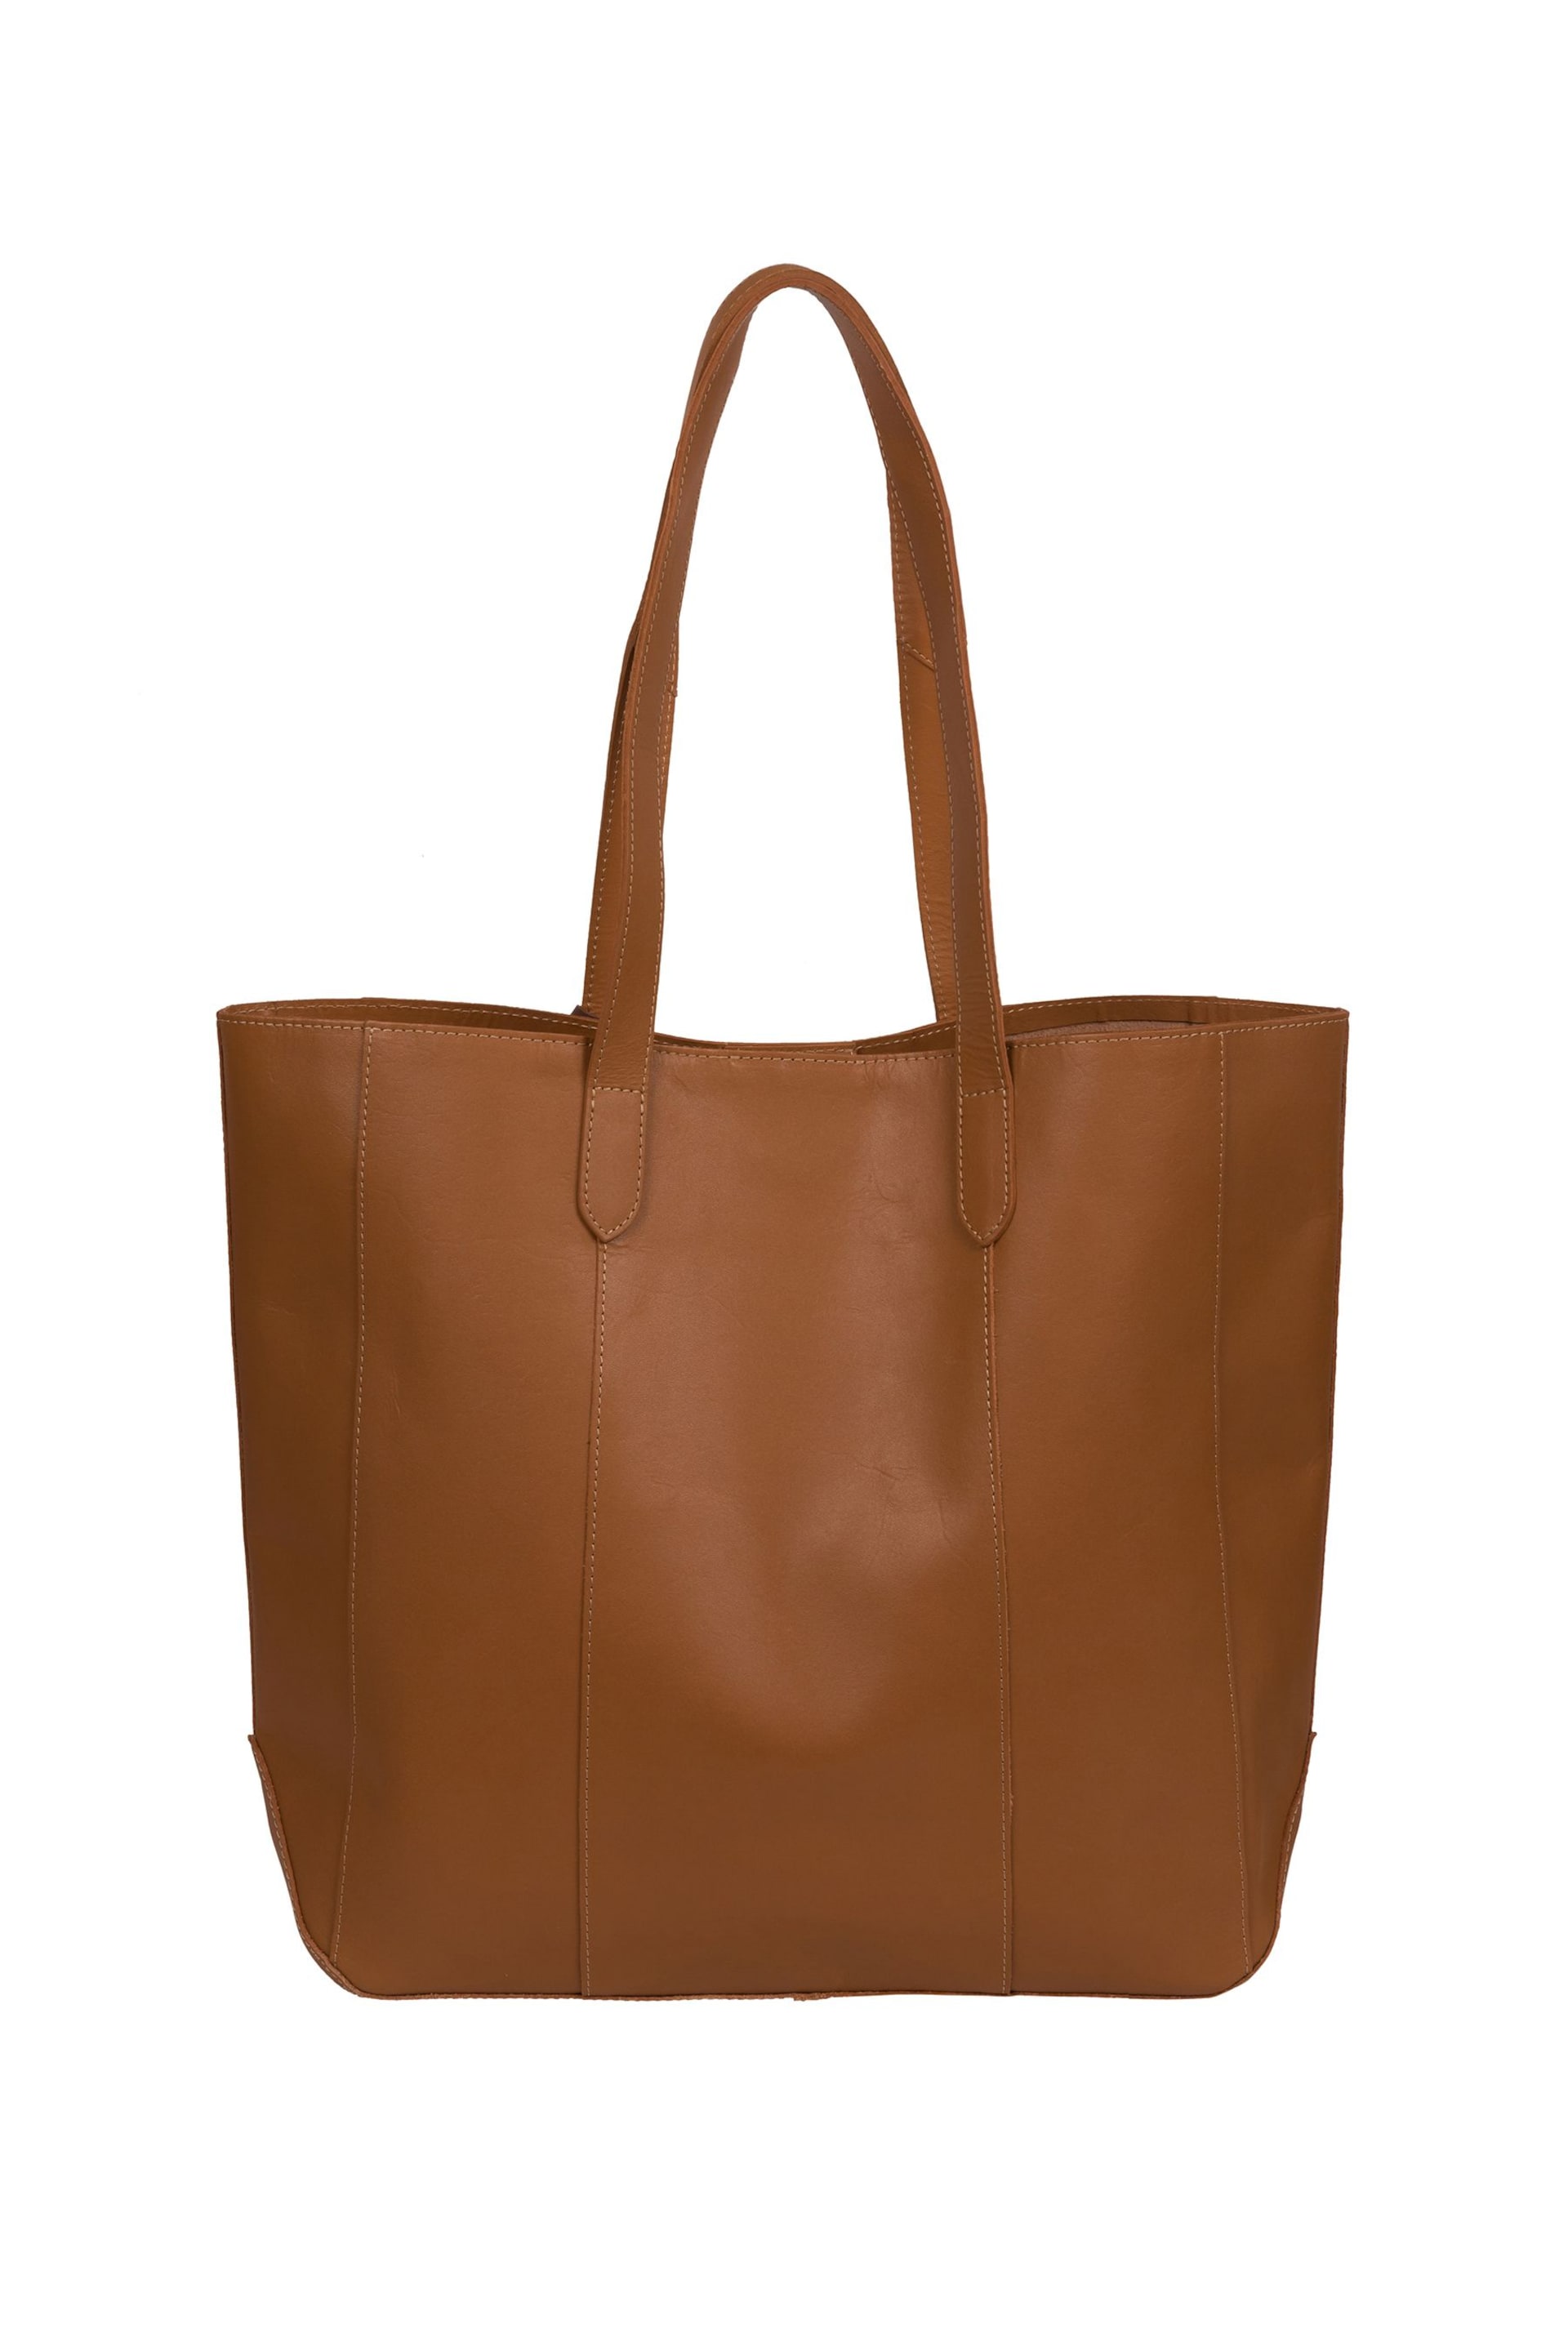 Conkca Hardy Vegetable-Tanned Leather Shopper Bag - Image 3 of 5